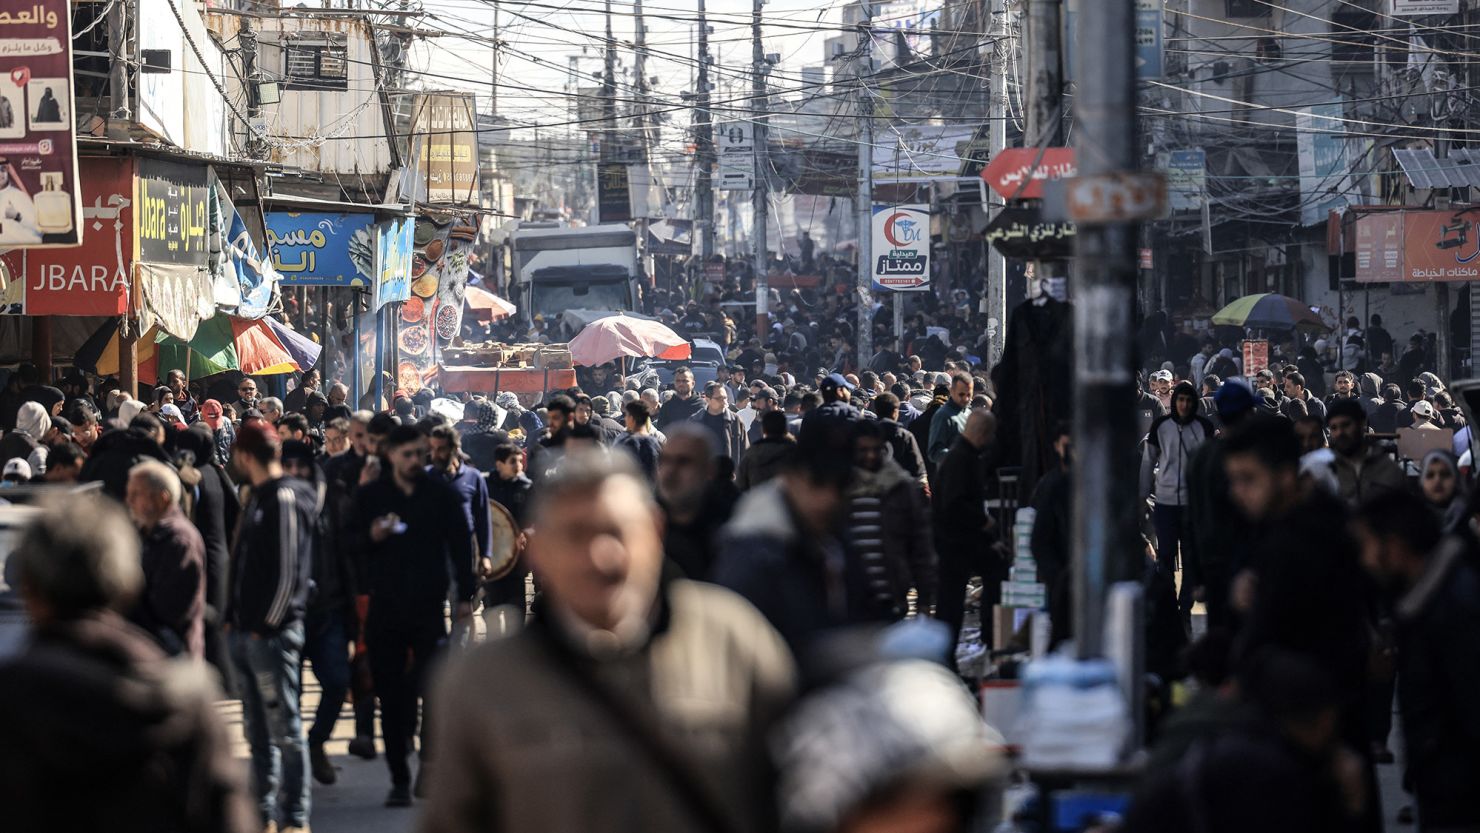 A crowded street in Rafah, where many displaced Palestinians have trekked as the IDF's ground campaign moved south through Gaza.